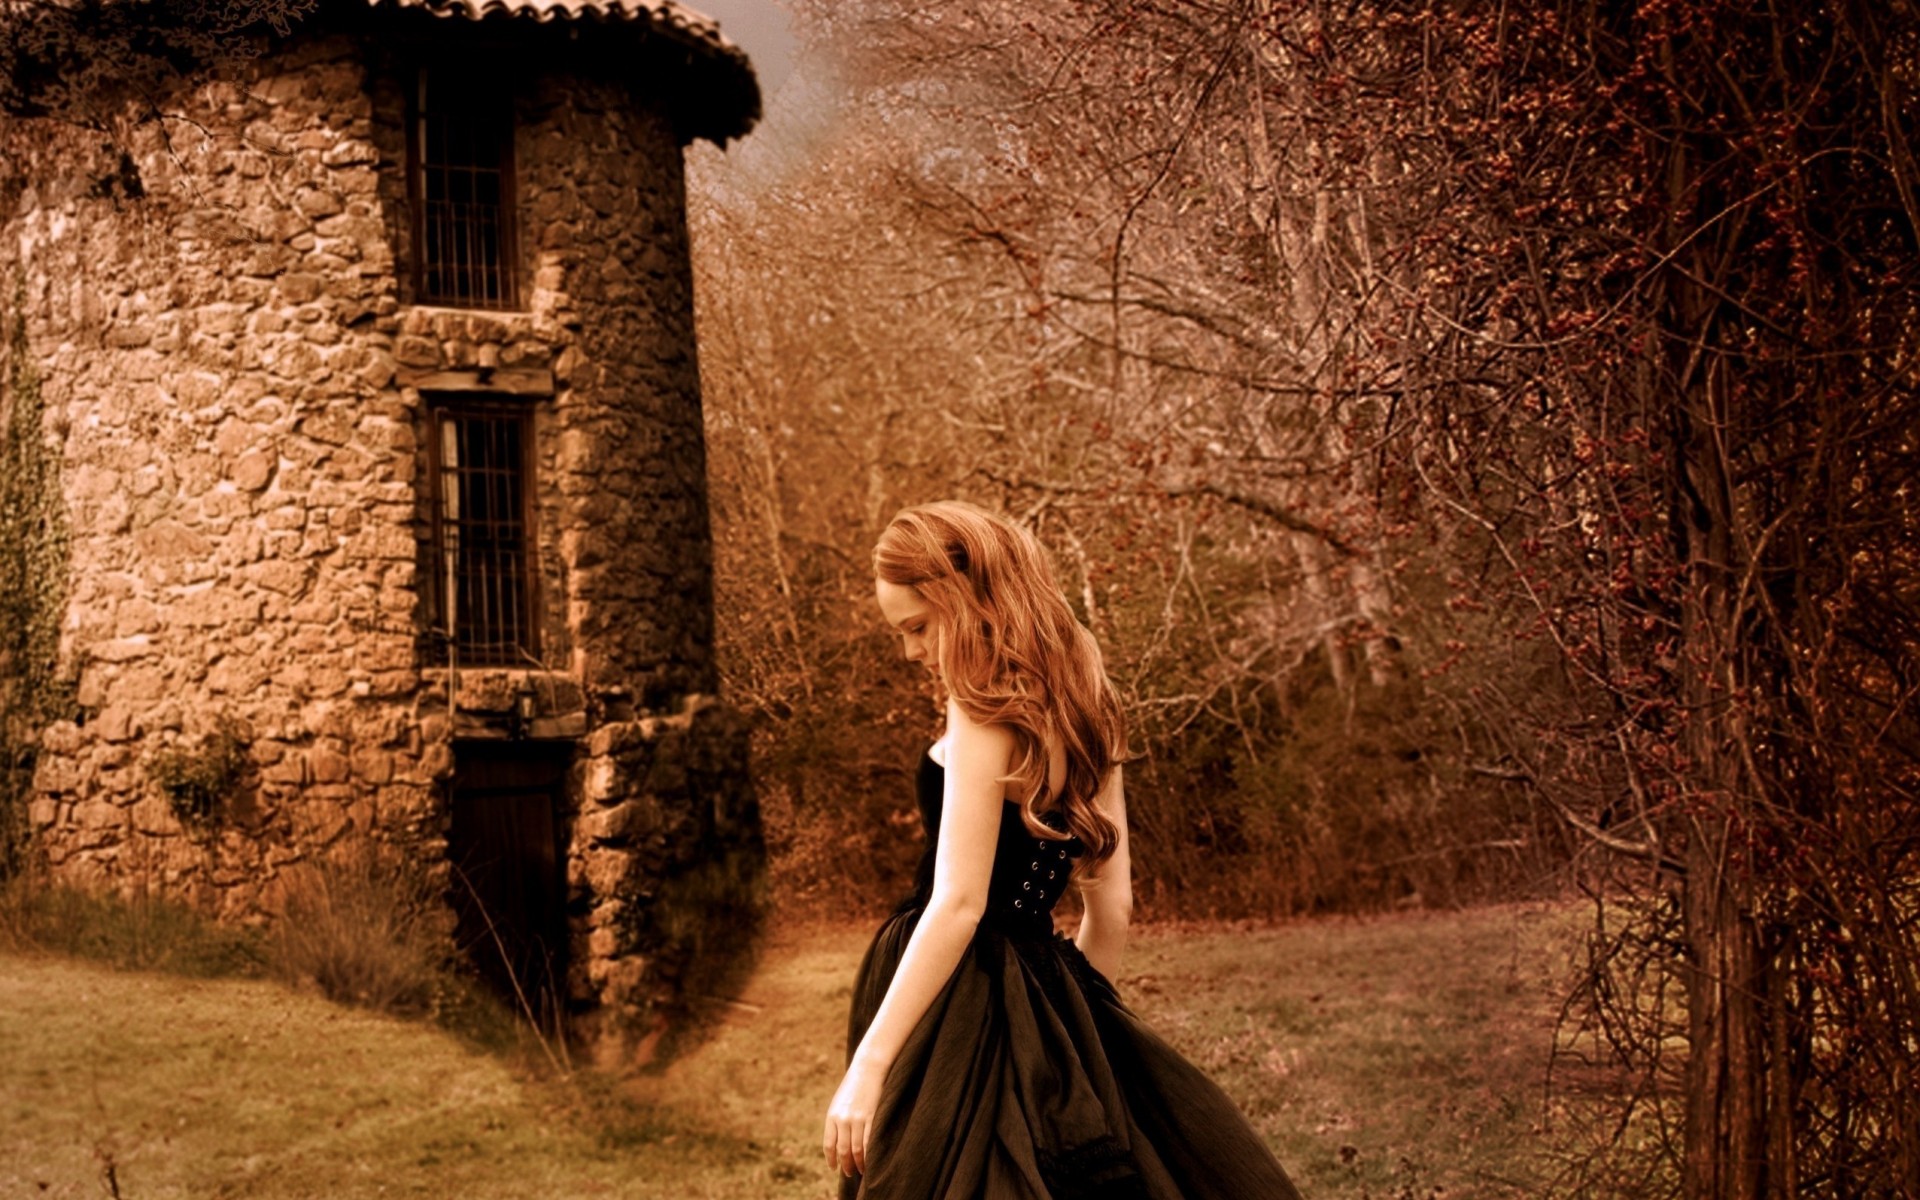 mood, Sadness, Sorrow, Architecture, Buildings, Women, Females, Girls, Redheads, Gothic Wallpaper